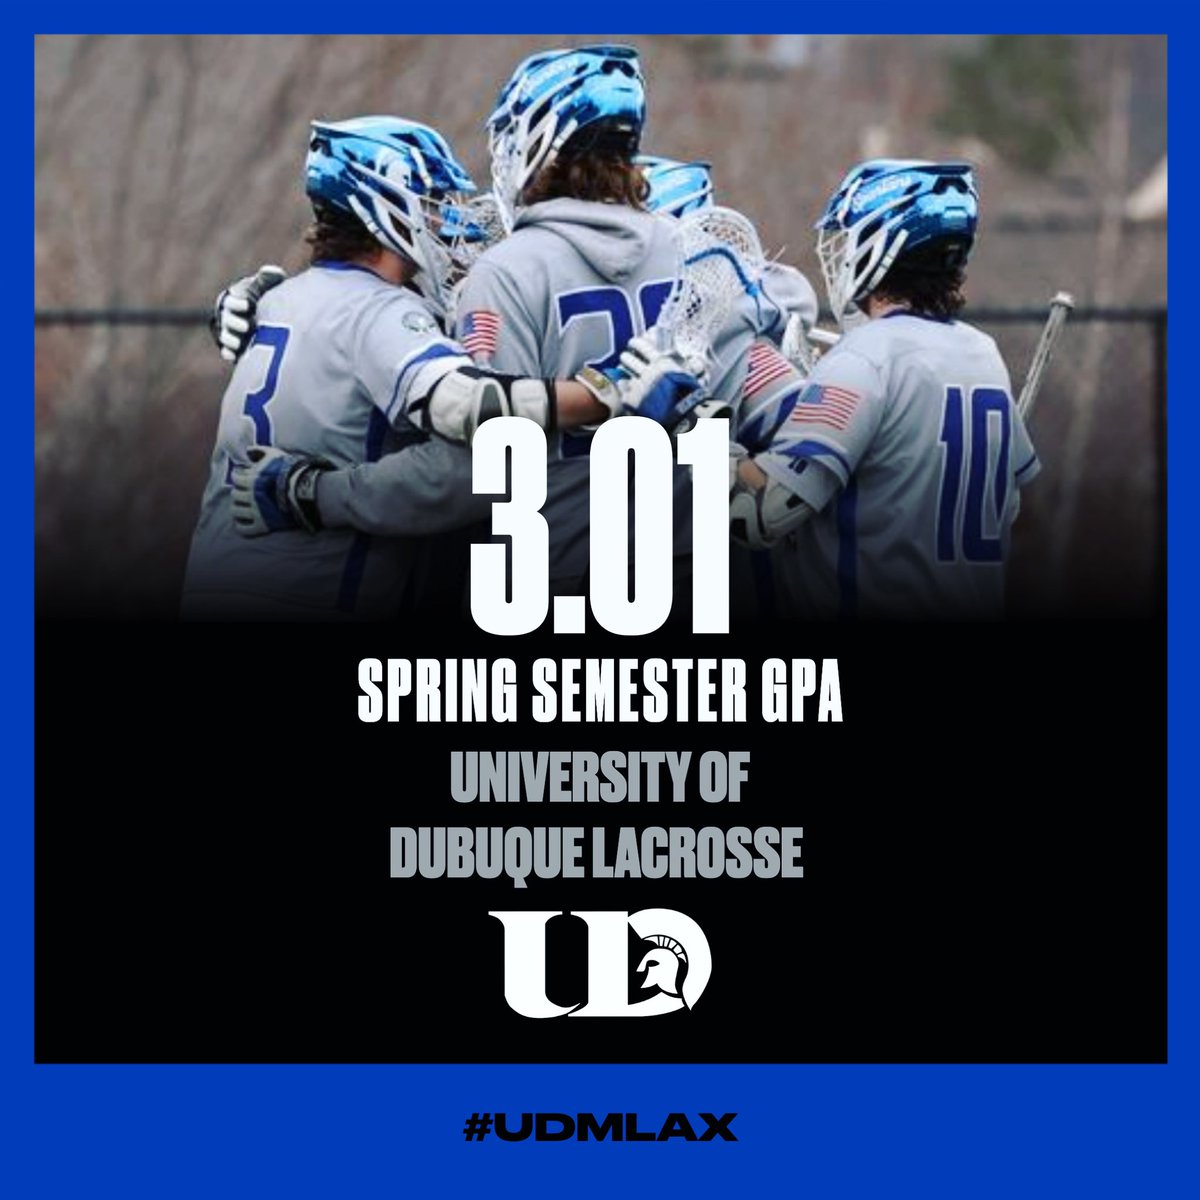 Very proud of our guys for not only excelling on the field this spring, but also for having a great semester in the classroom! 

#UDMLAX #Spartans #StudentAthletes